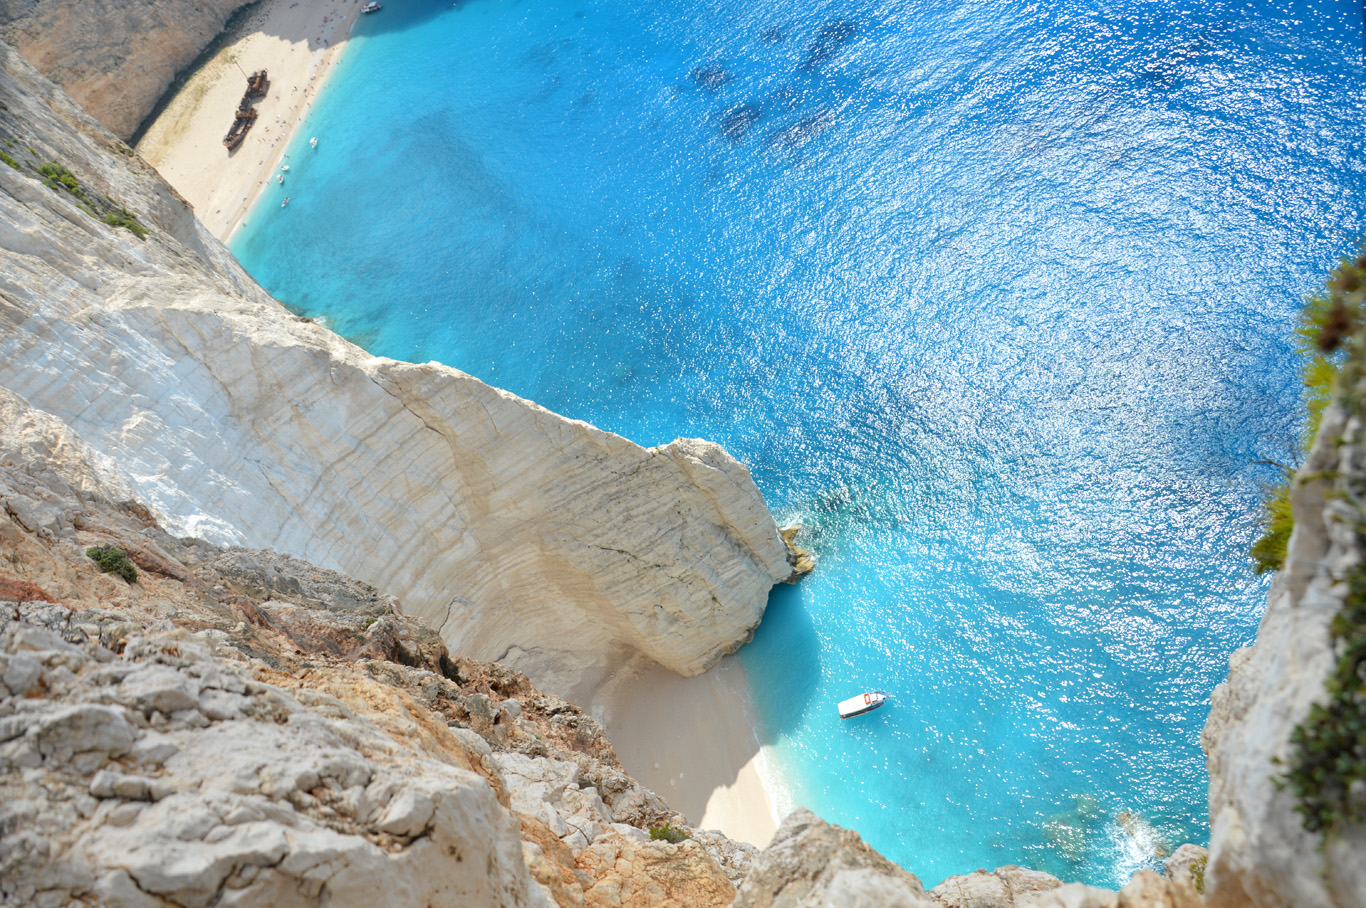 How To Reach The Shipwreck (Navagio) Beach In Zakynthos, Greece - The